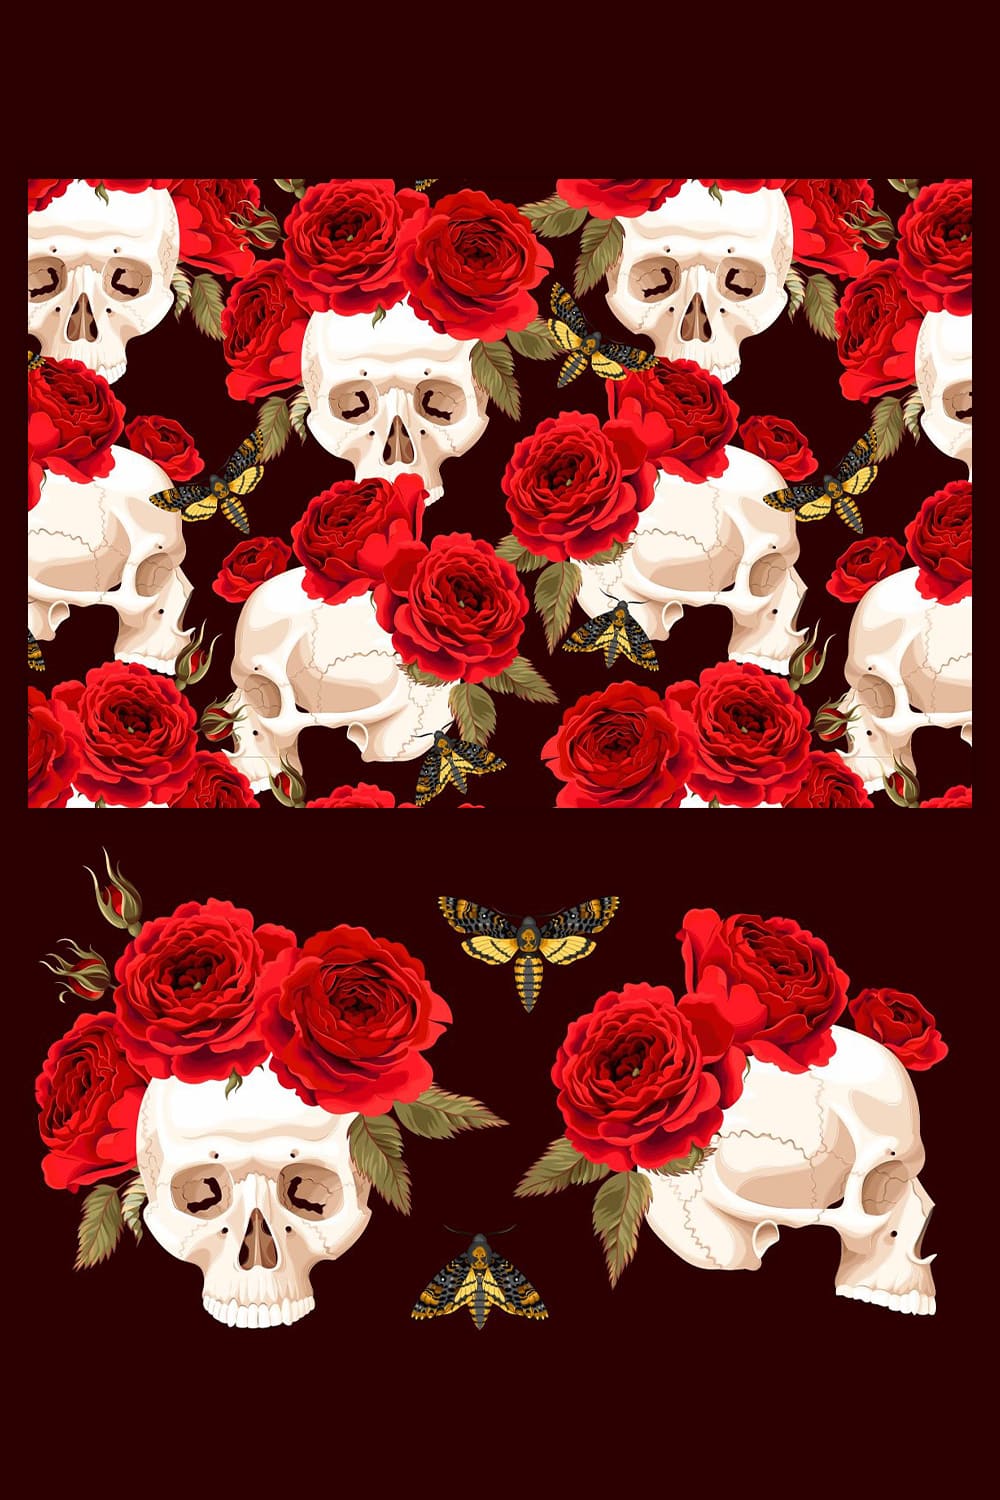 pattern with skulls and roses for your design.